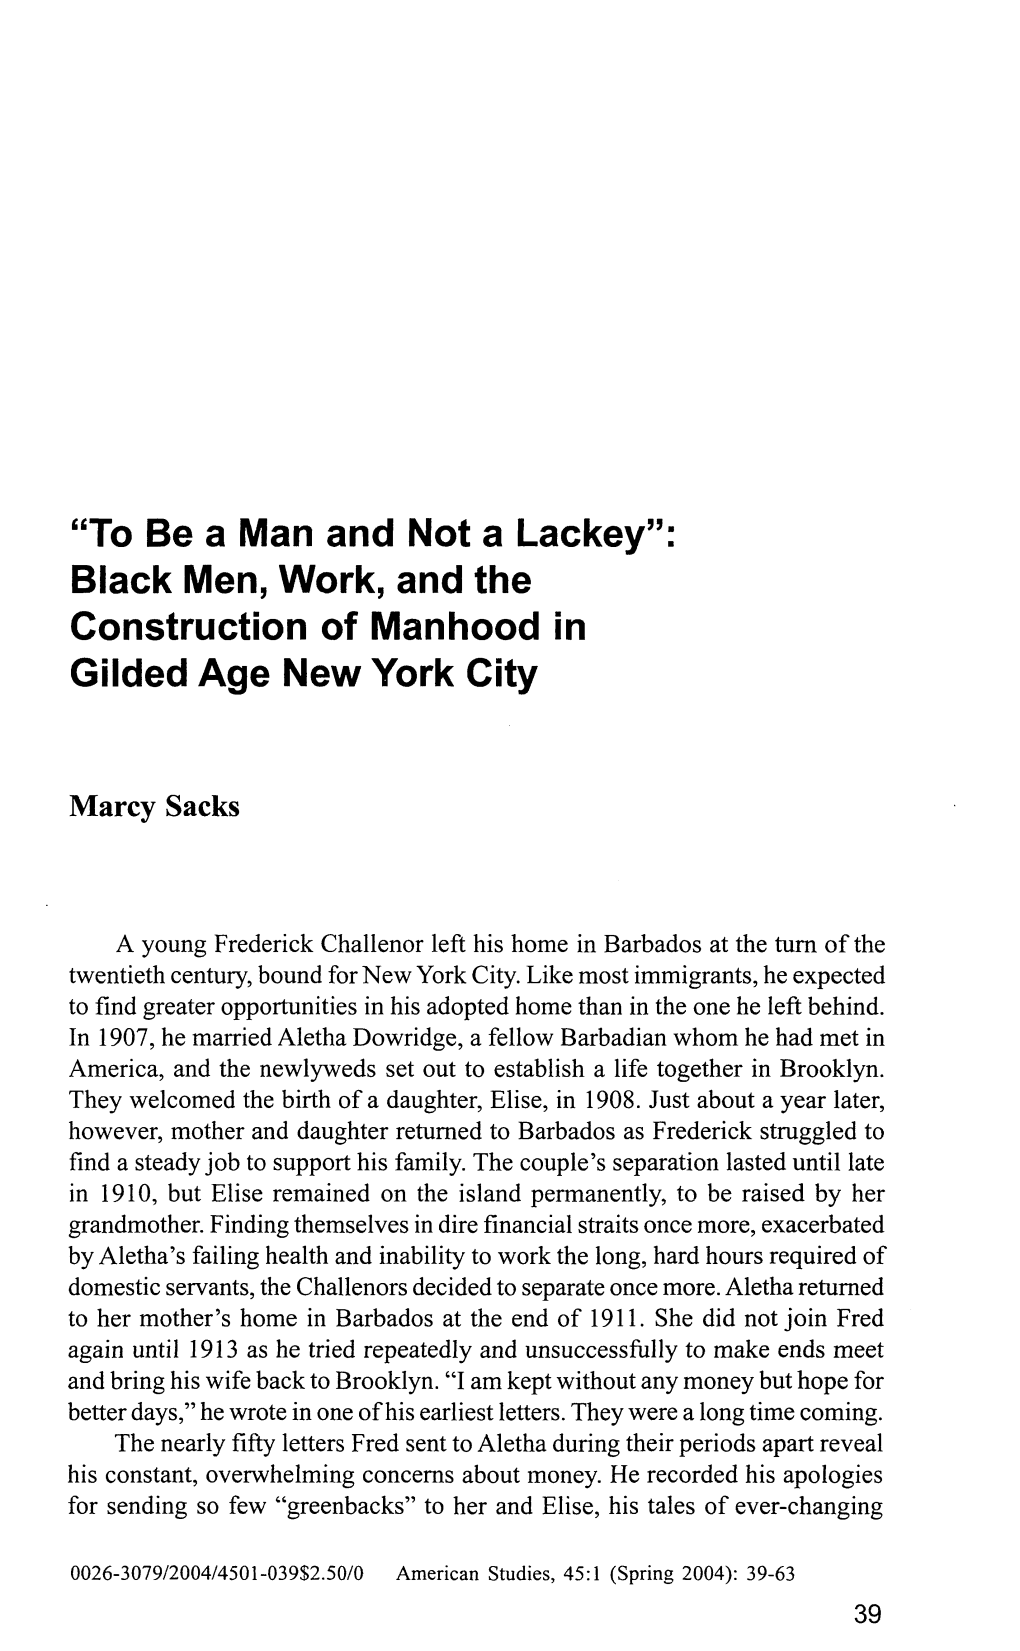 To Be a Man and Not a Lackey": Black Men, Work, and the Construction of Manhood in Gilded Age New York City